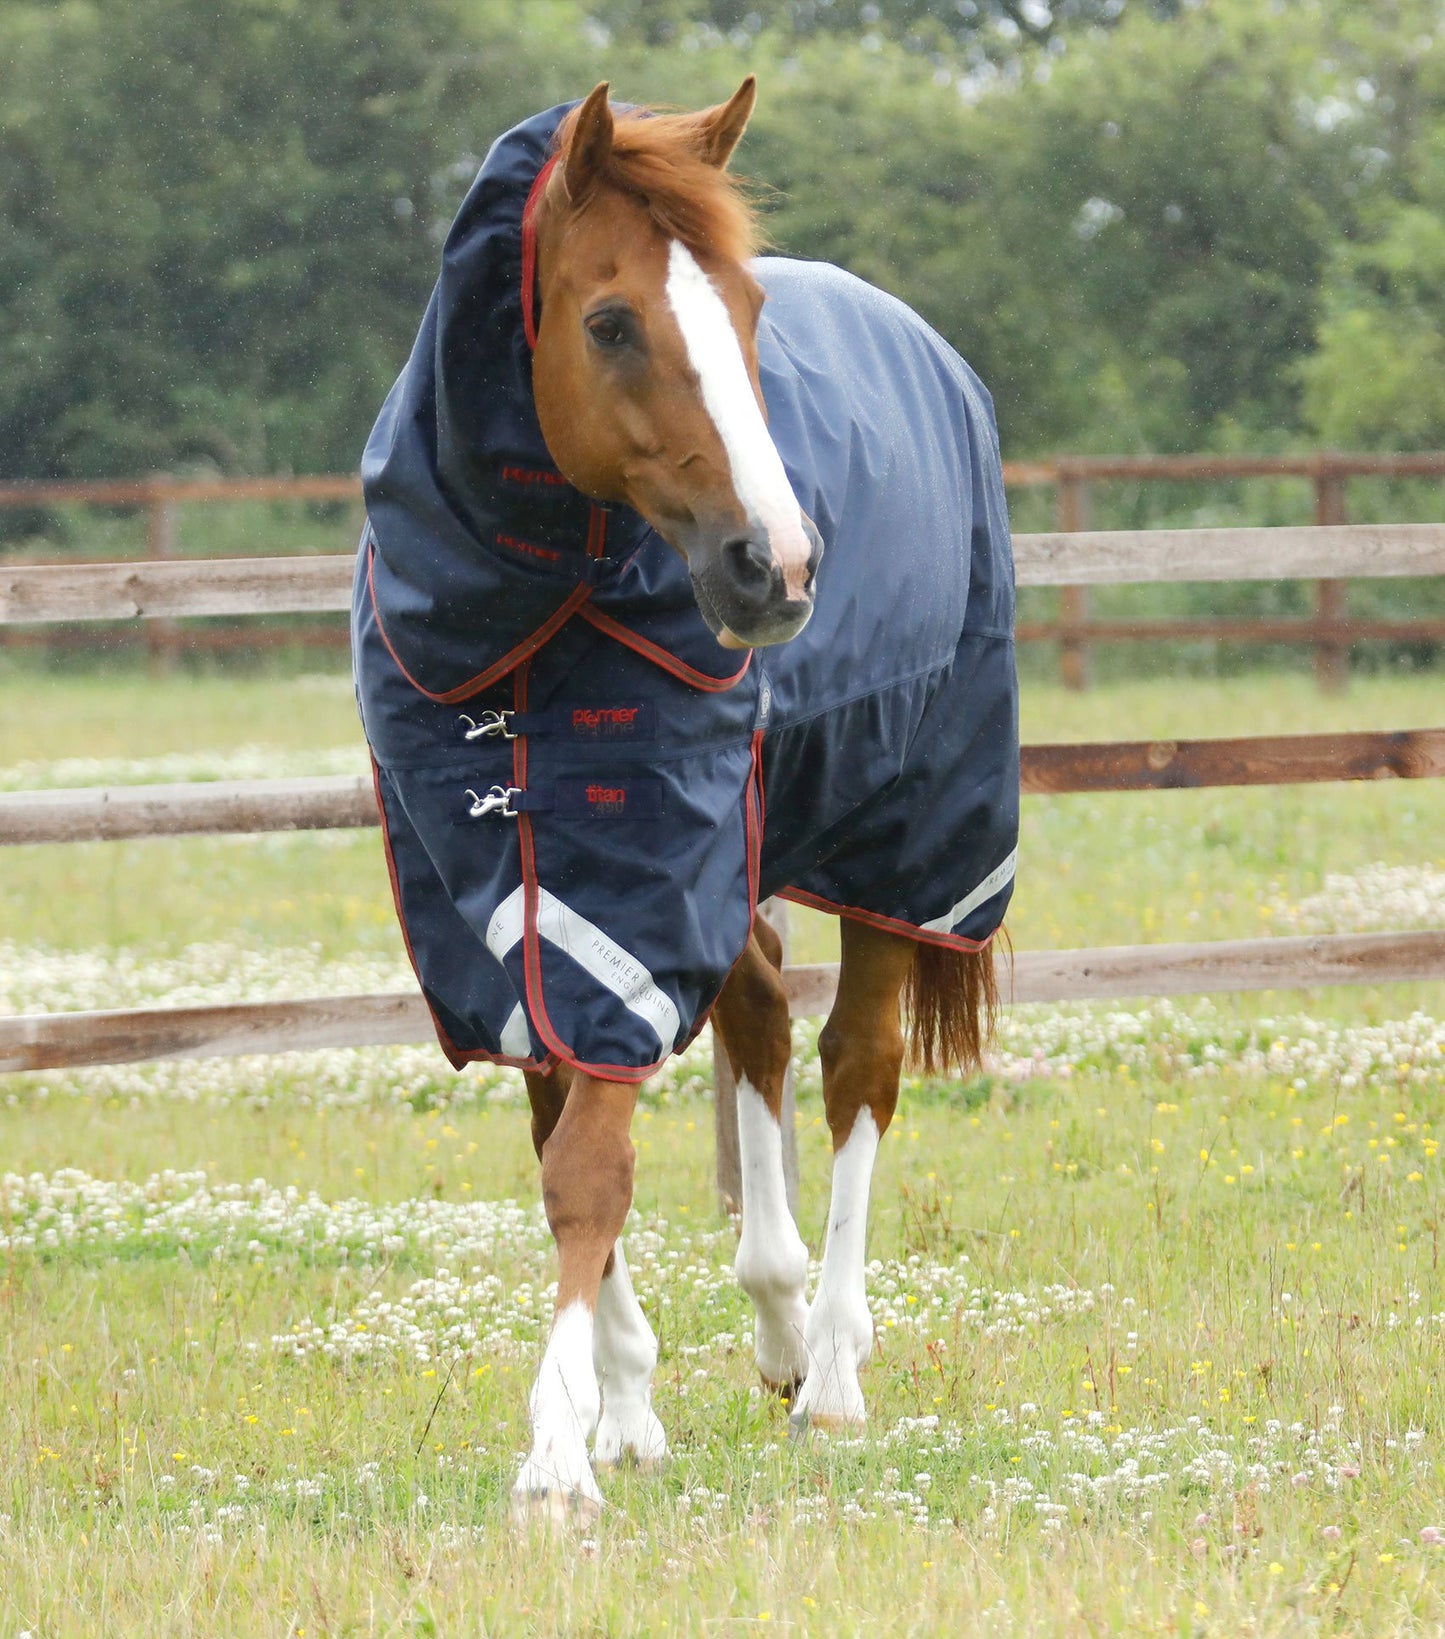 Premier Equine Titan 450g Turnout Rug with Neck Cover